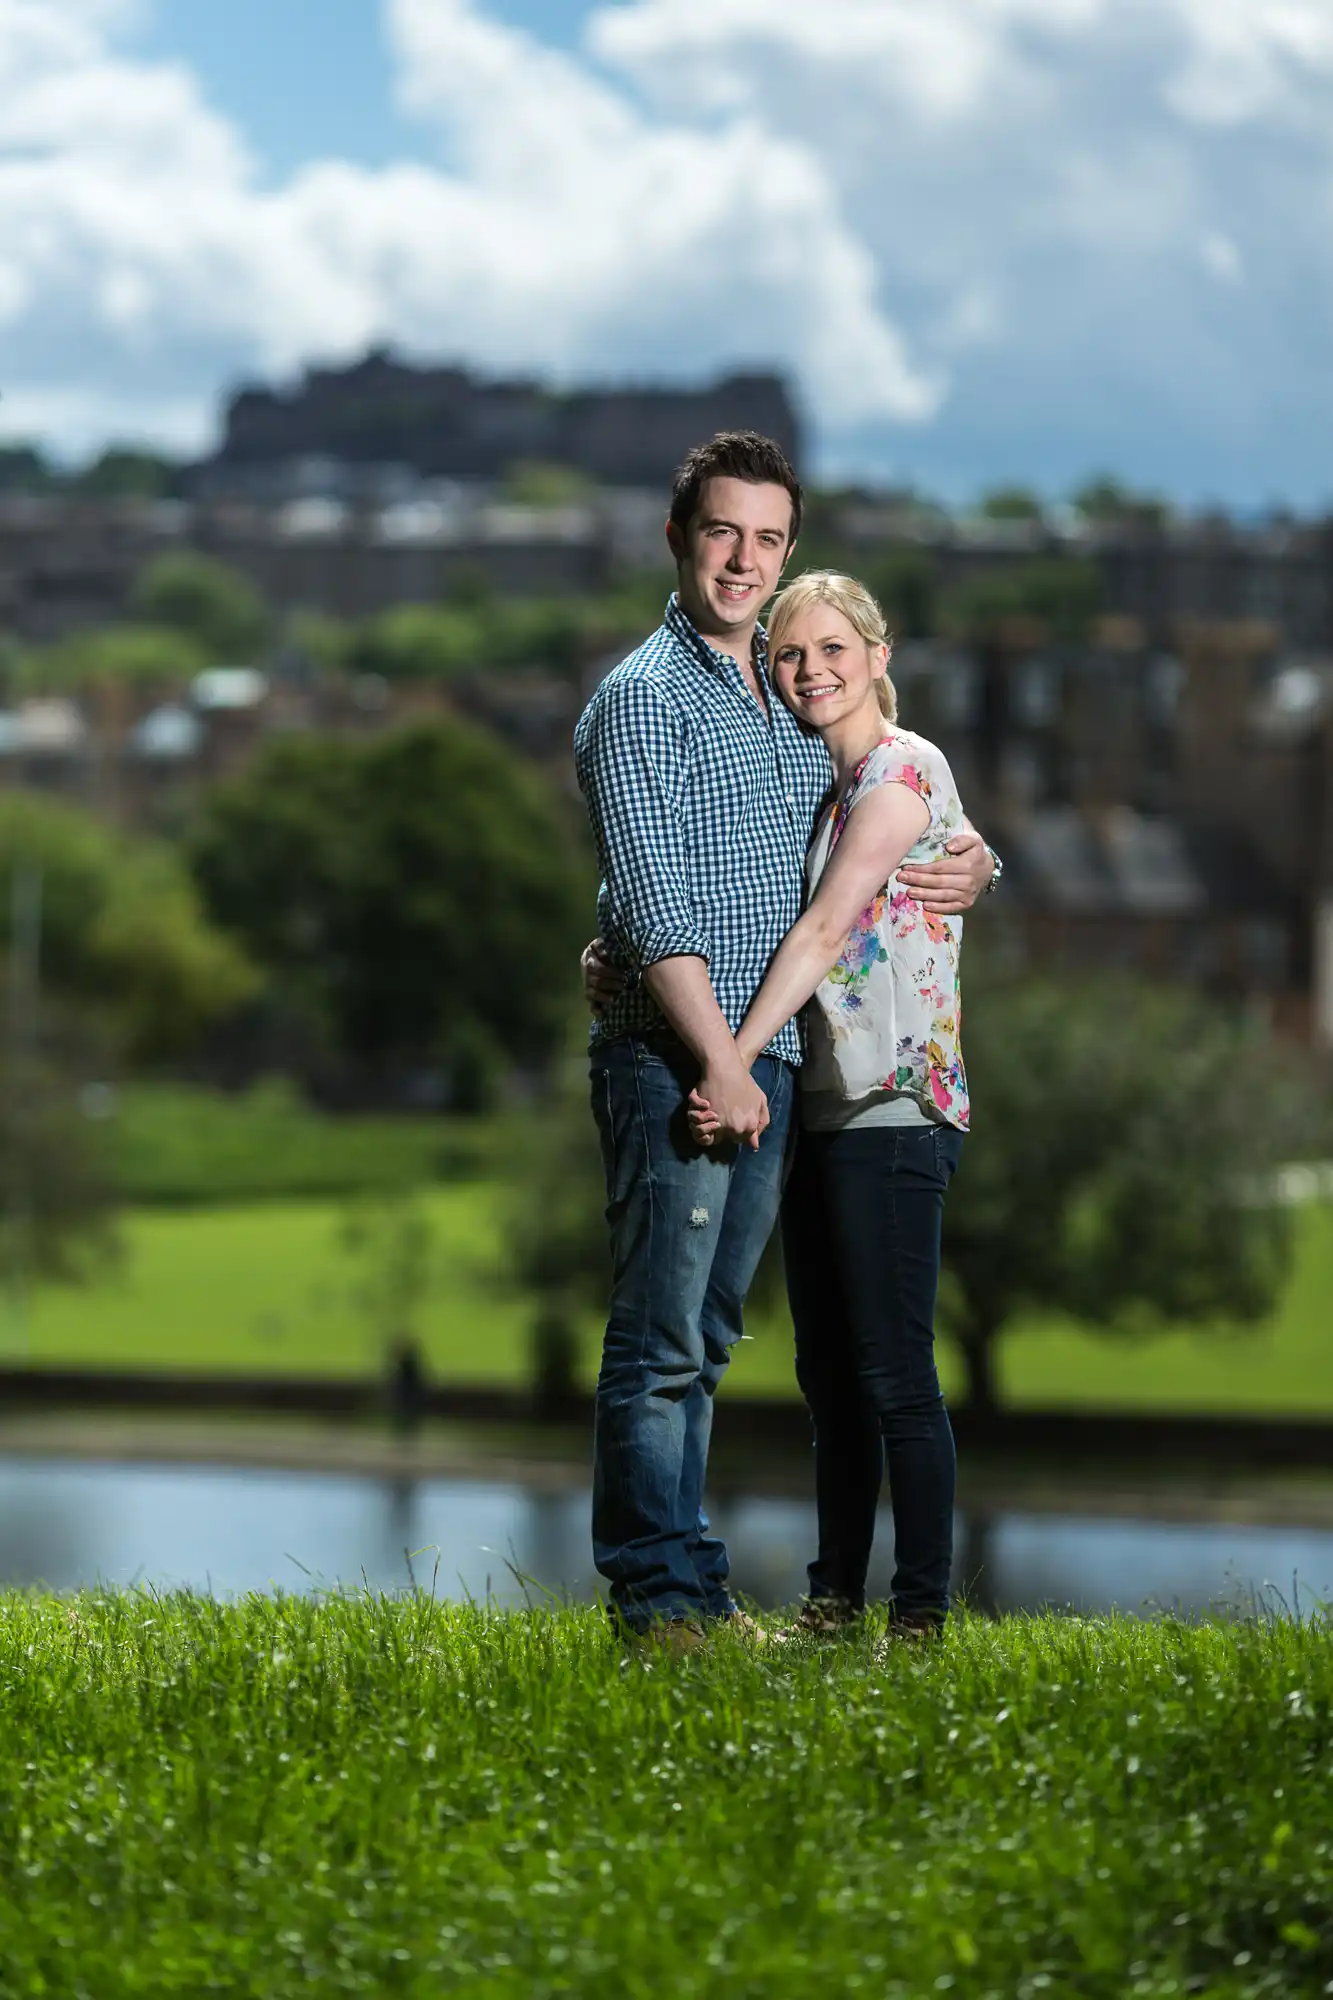 A couple embracing in a grassy field with a cityscape and castle in the background on a sunny day.